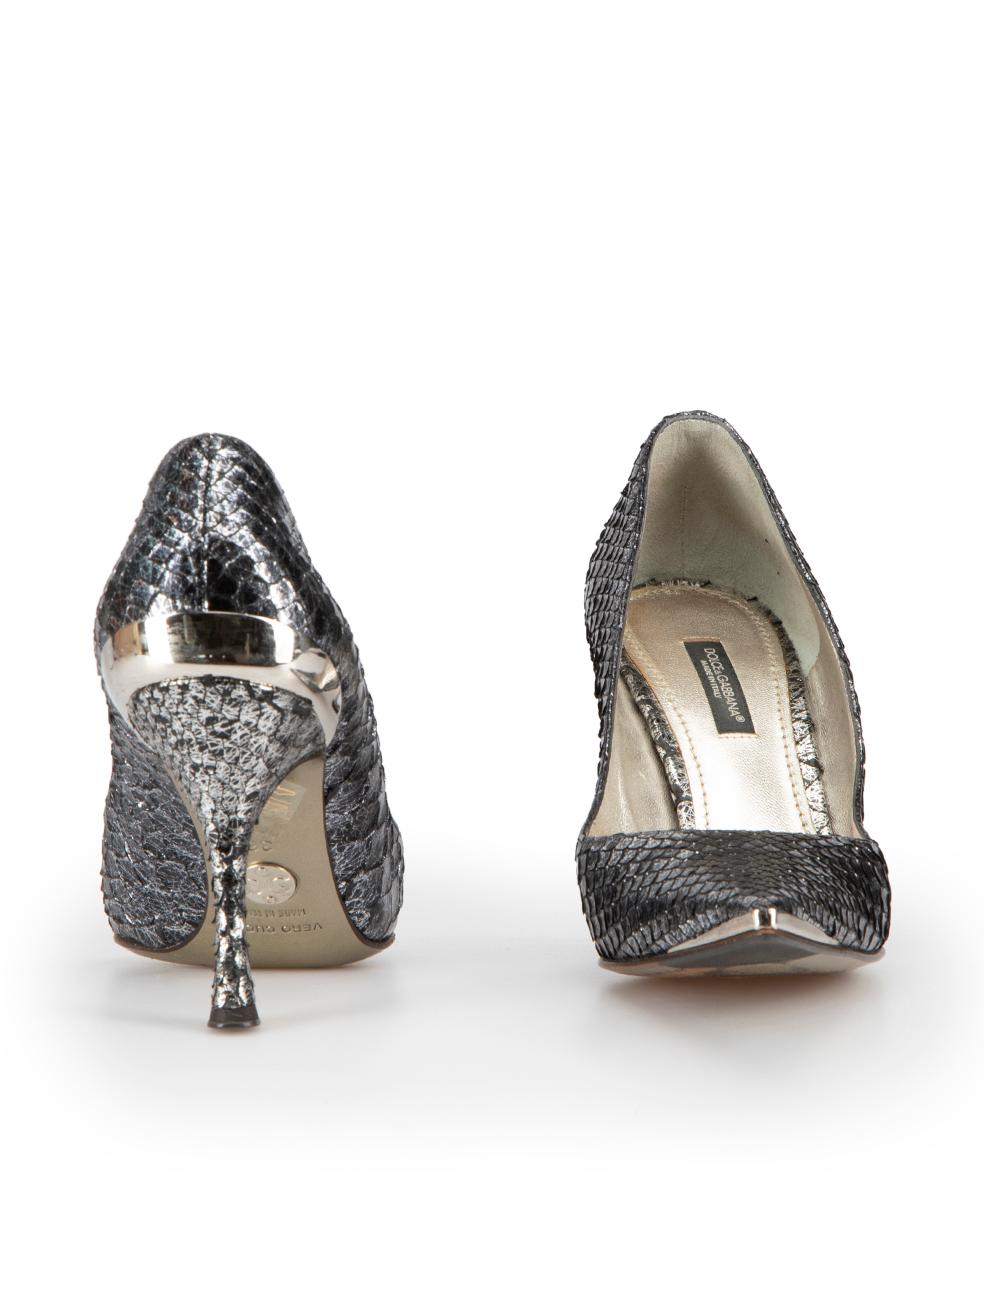 Dolce & Gabbana Vintage Black & Silver Snake Skin Pointed-Toe Heels Size IT 36 In Good Condition In London, GB